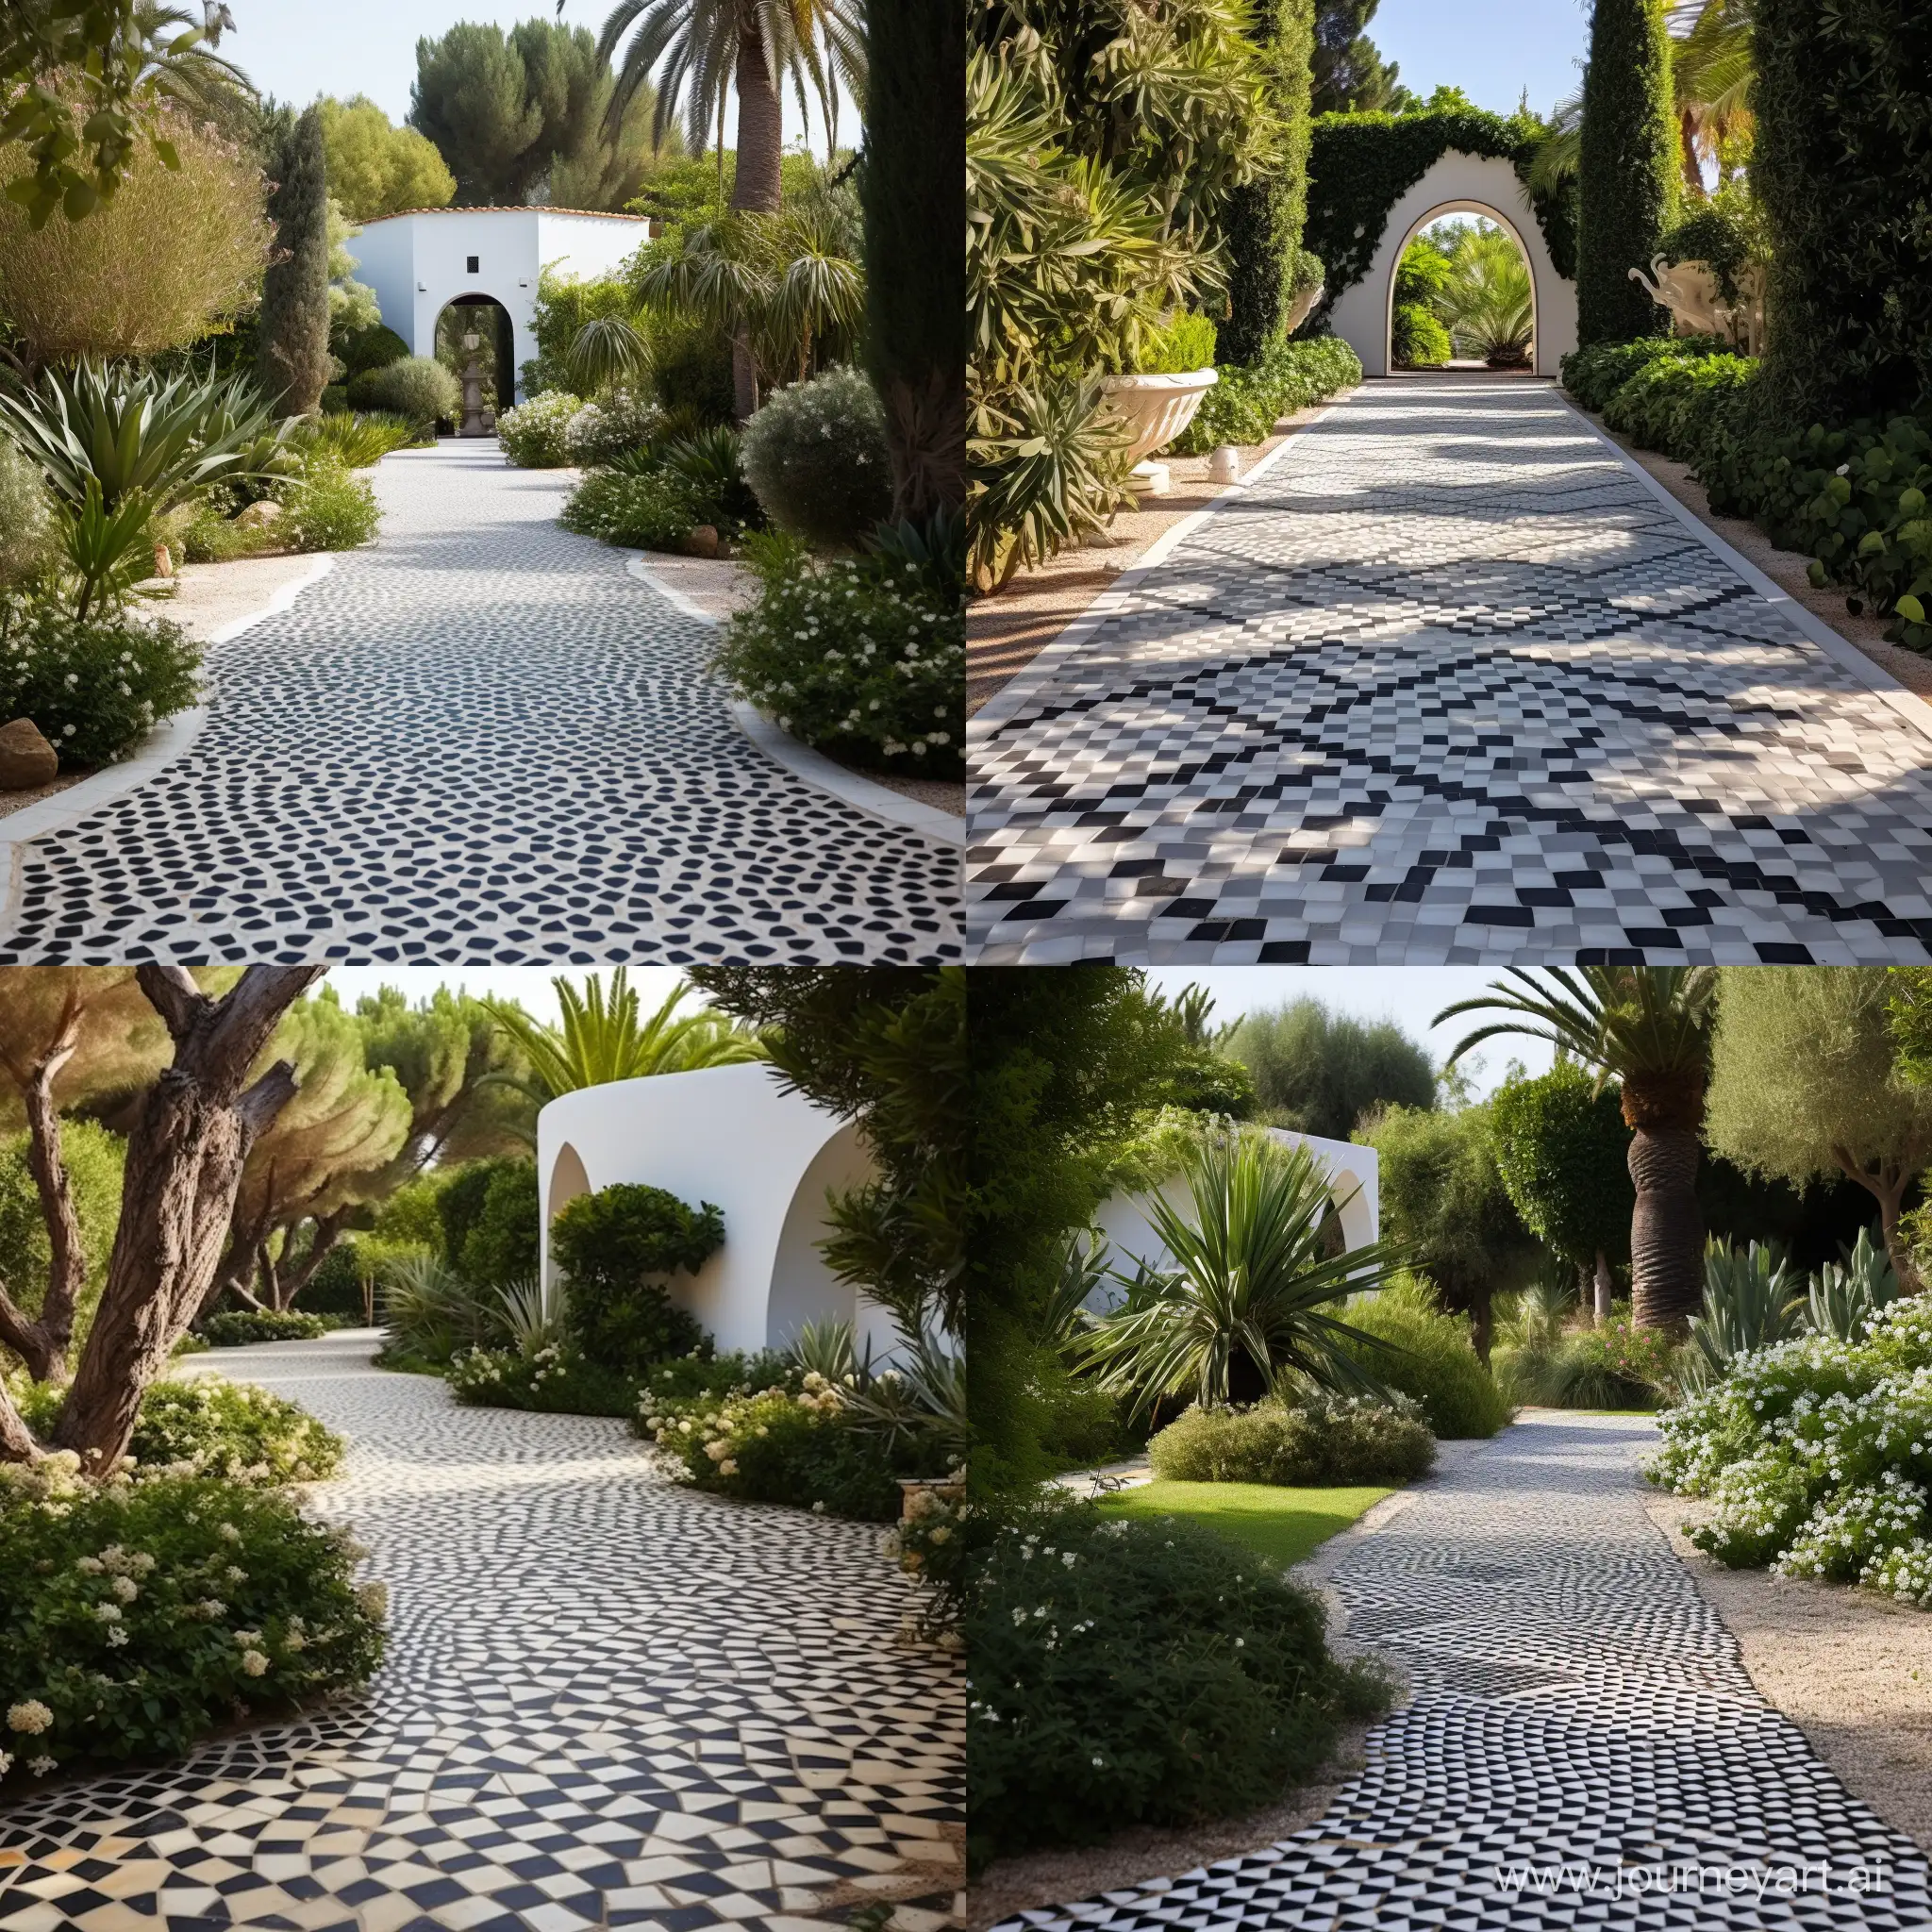 Elegant-Geometric-Patterned-Footpath-in-Villa-Garden-with-White-and-Black-Gravel